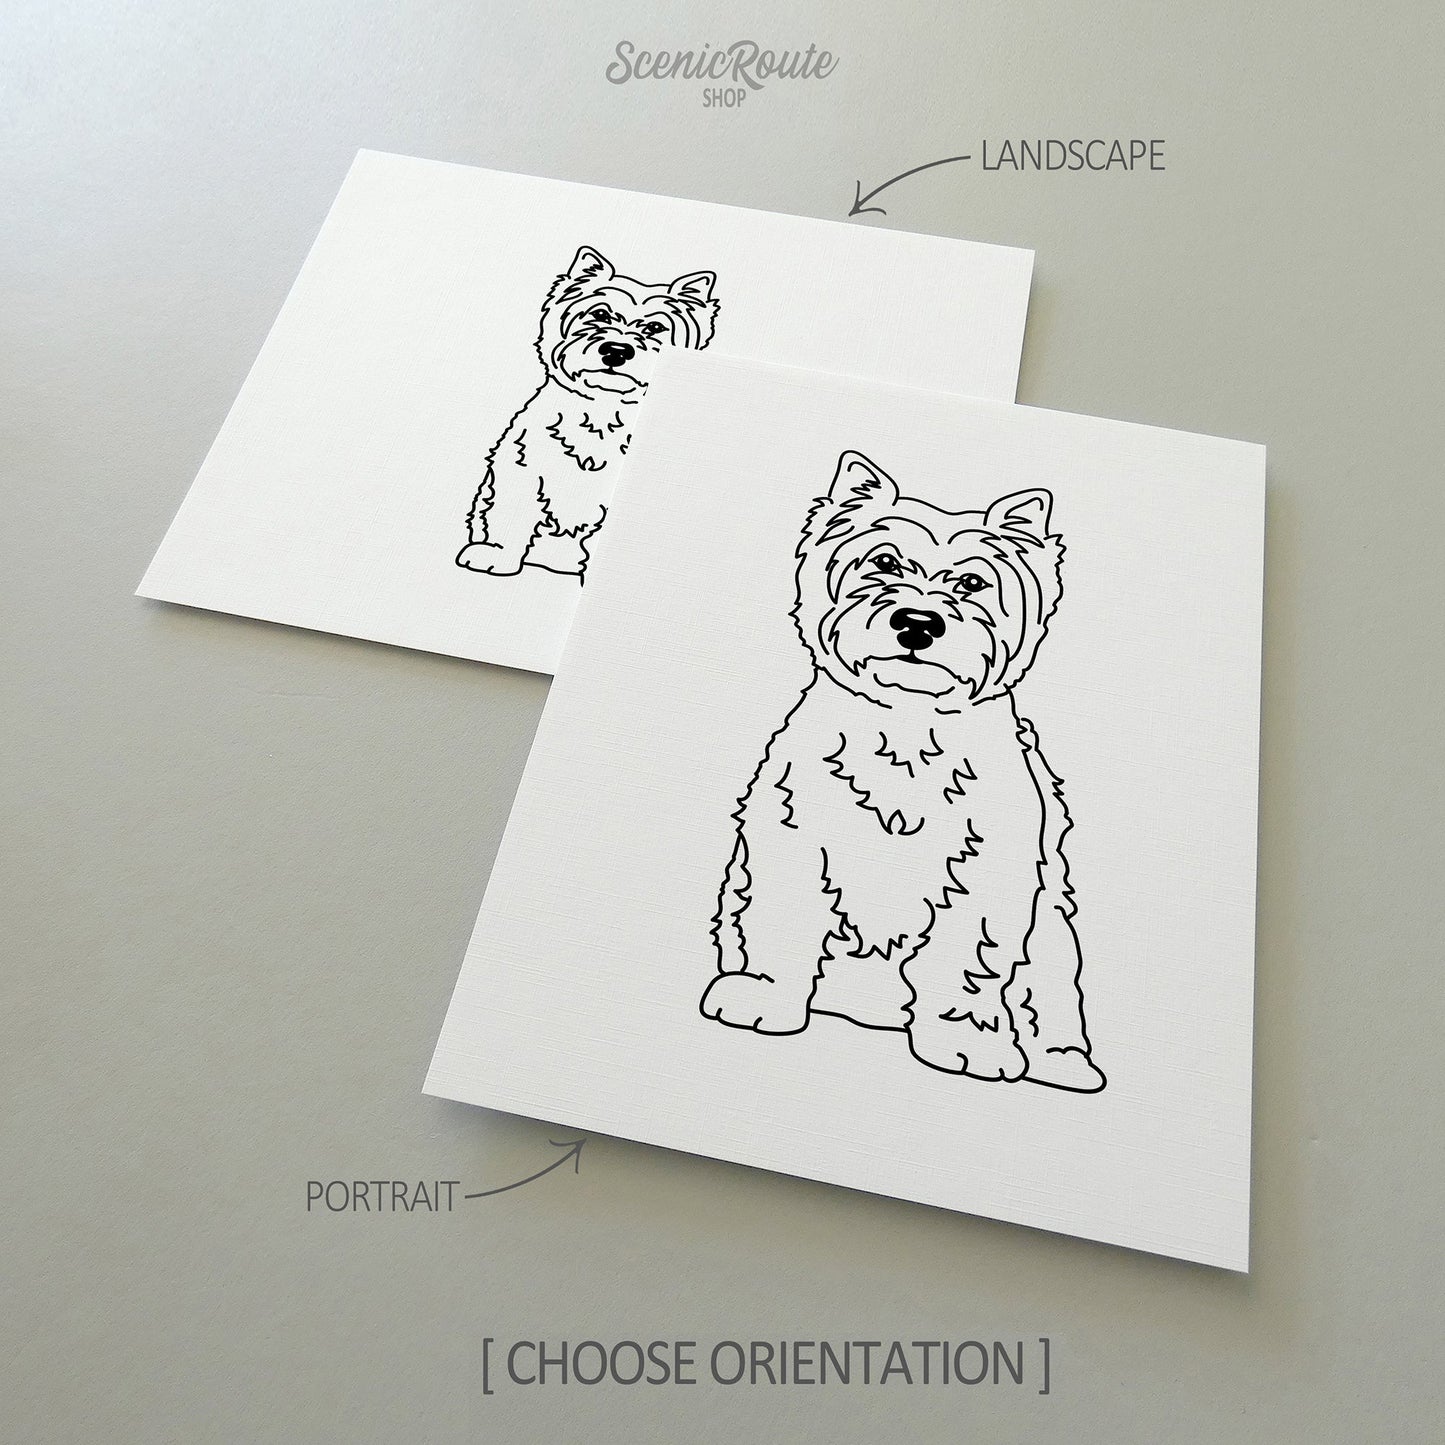 Two line art drawings of a West Highland Terrier dog on white linen paper with a gray background.  The pieces are shown in portrait and landscape orientation for the available art print options.